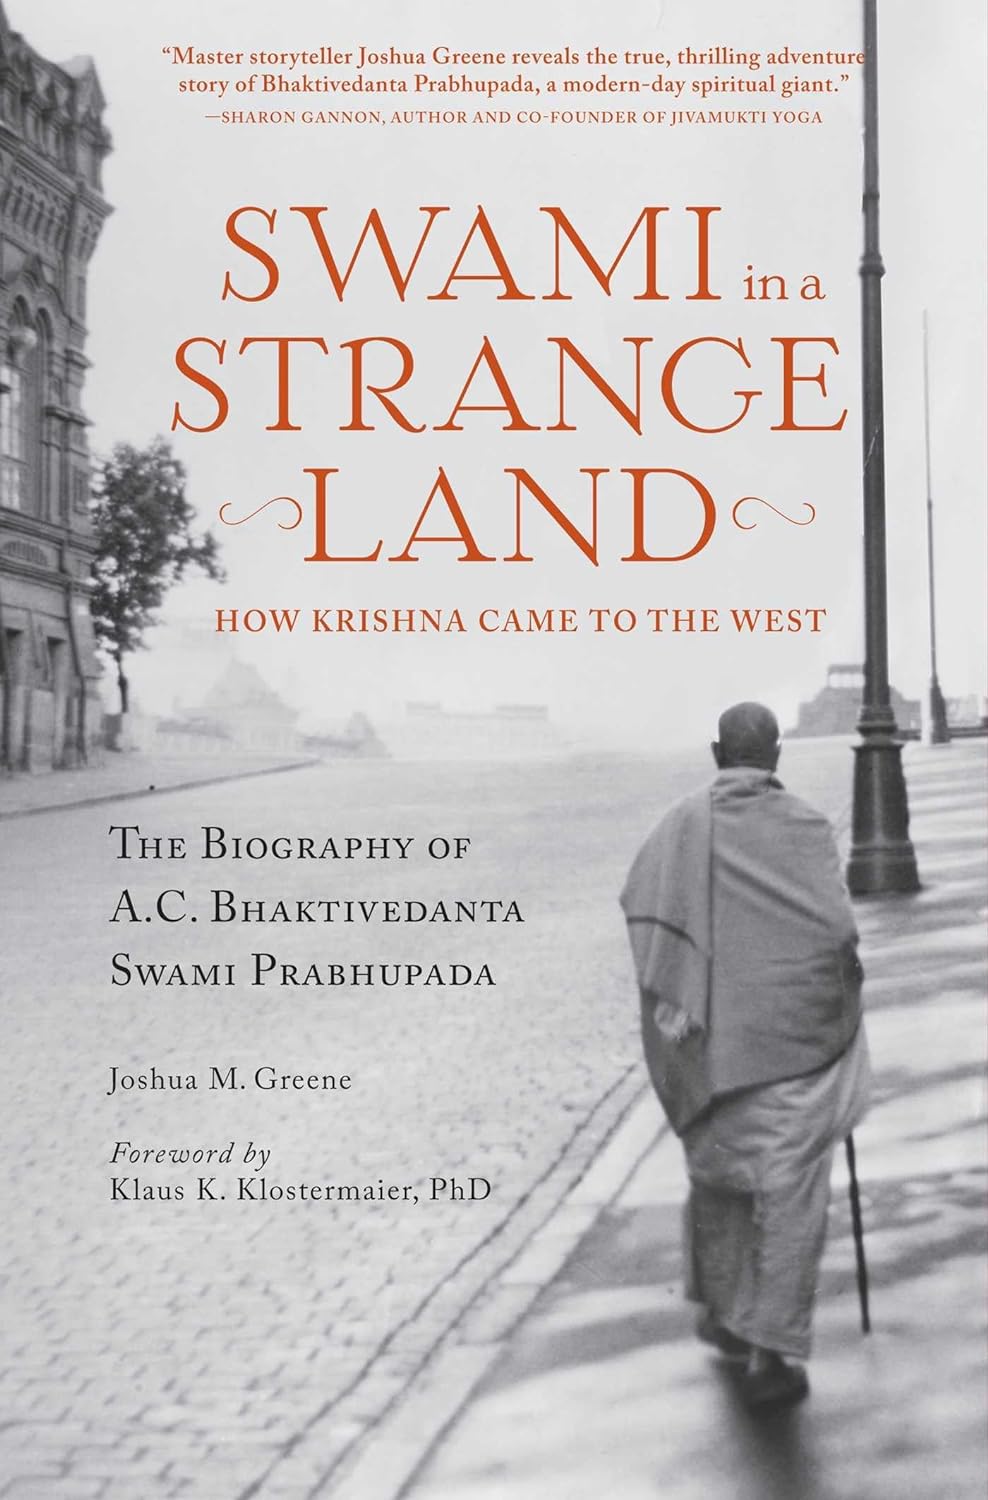 Swami in a Strange Land: How Krishna Came to the West, by Joshua M. Greene